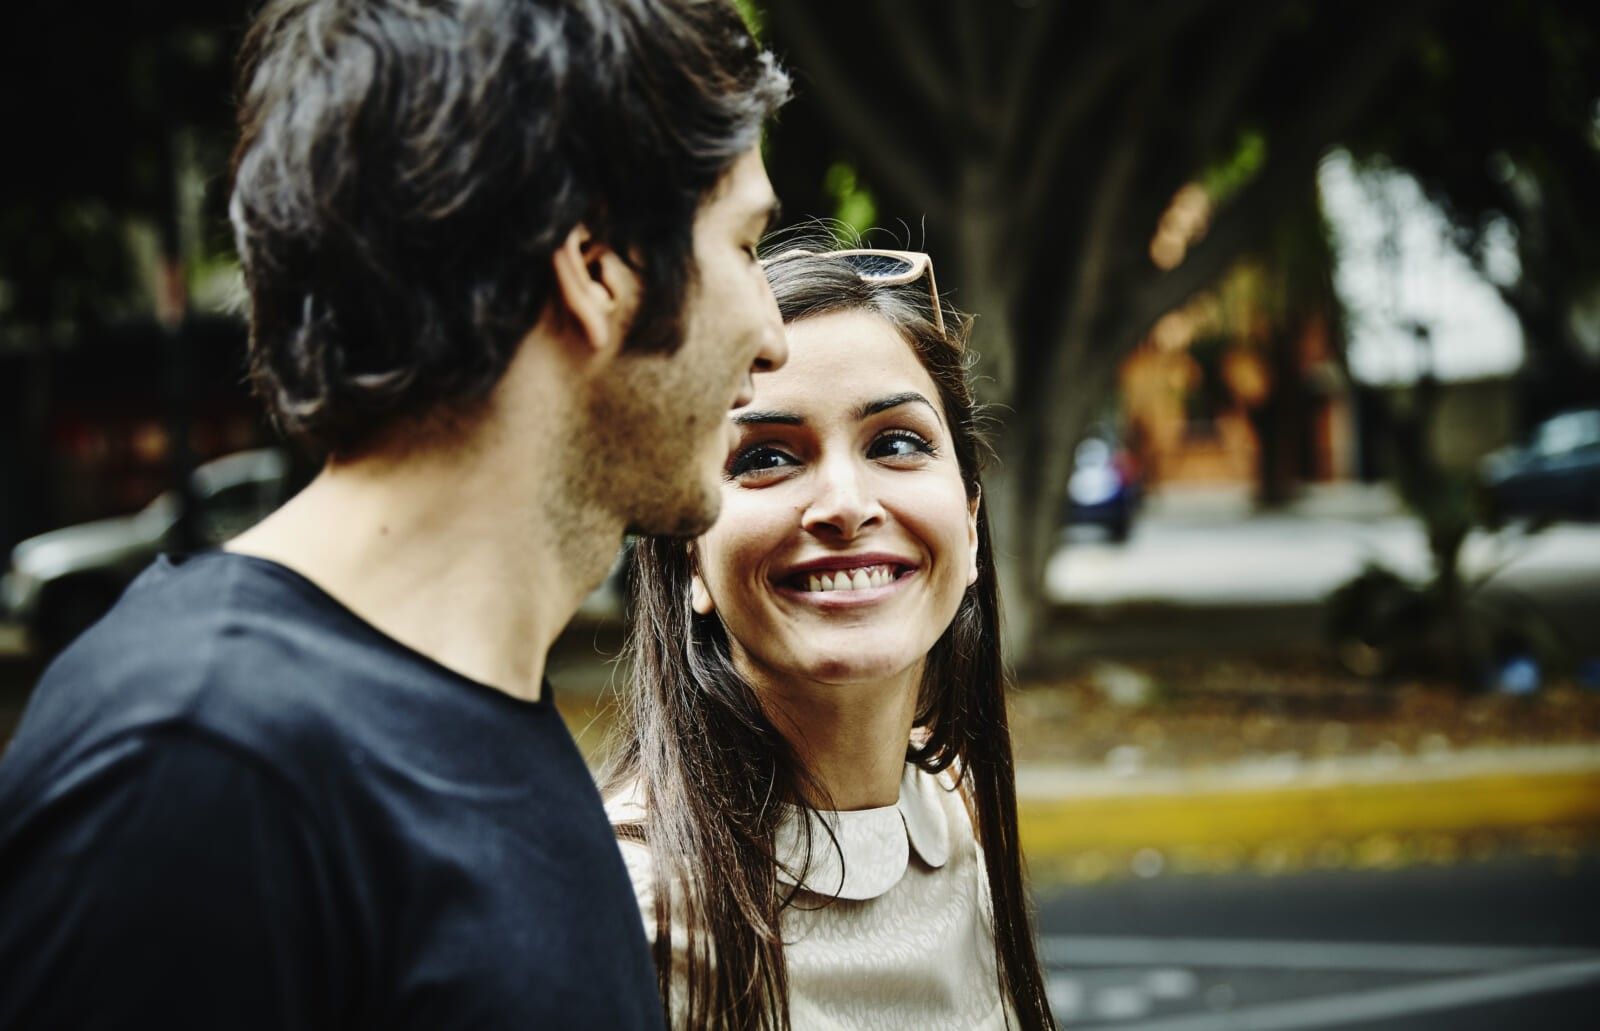 Smiling woman in discussion with boyfriend walking on sidewalk of city street on summer evening